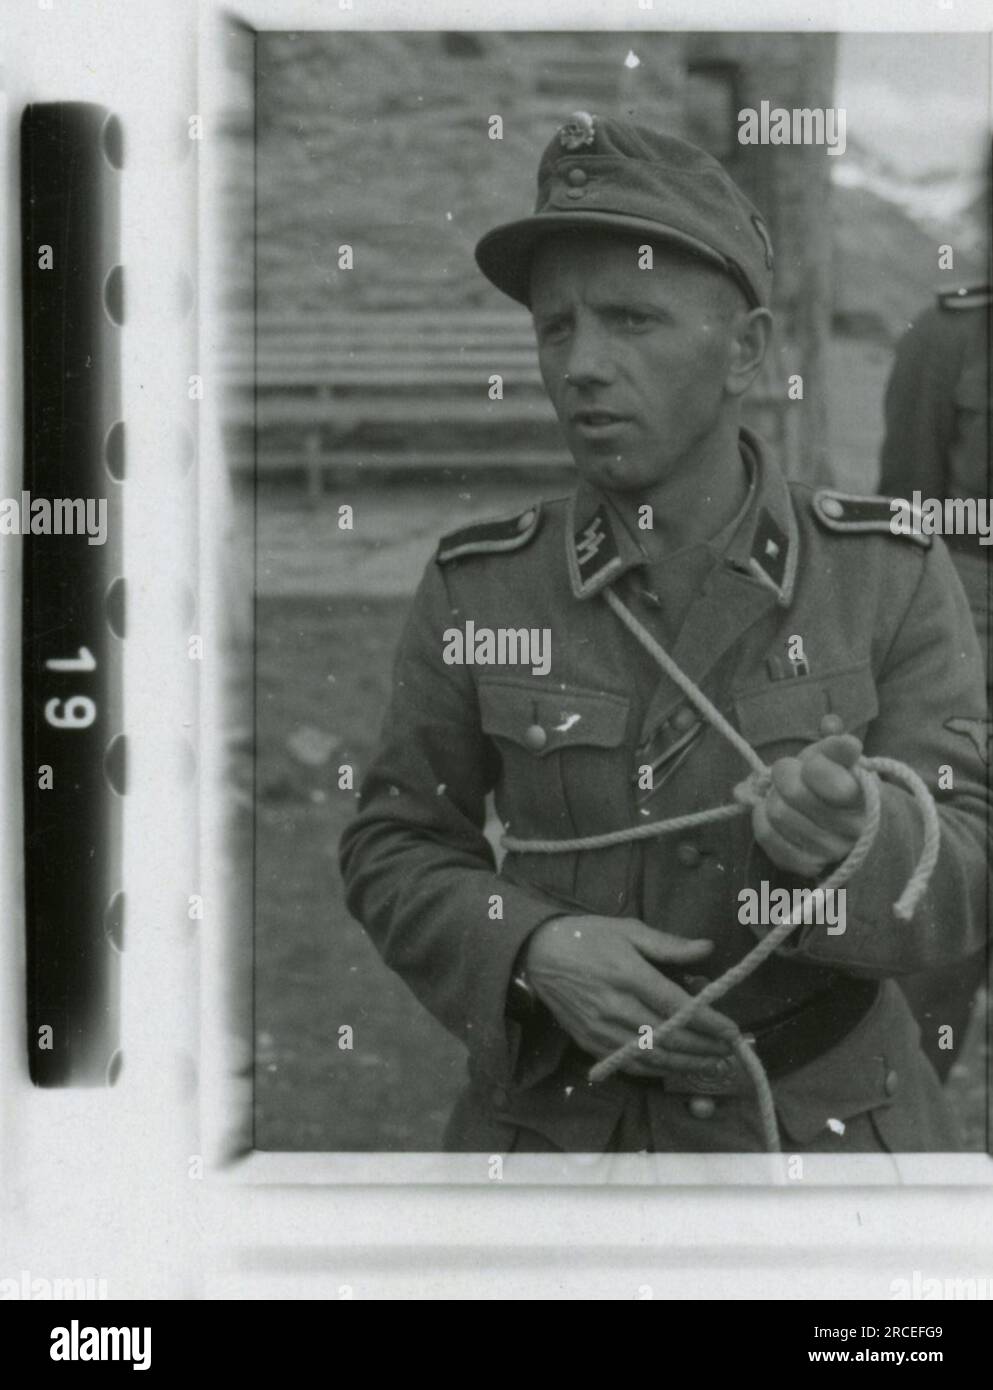 SS Photographer, Fink ,1943 & 1944 Funeral procession, Reinhard Heydrich, artist sculpting bust of Heydrich,  Heinrich Himmler, soldiers training with rocket launcher, ski troops training in mountains, bridging operation in mountains. Images depicting the front-line activities of Waffen-SS units on the Western and Eastern Fronts, including Poland, France, Balkans, Italy, and Russia, as well as training exercises, portraits of individuals and group views, and scenes of cities and towns, and local populations. Stock Photo